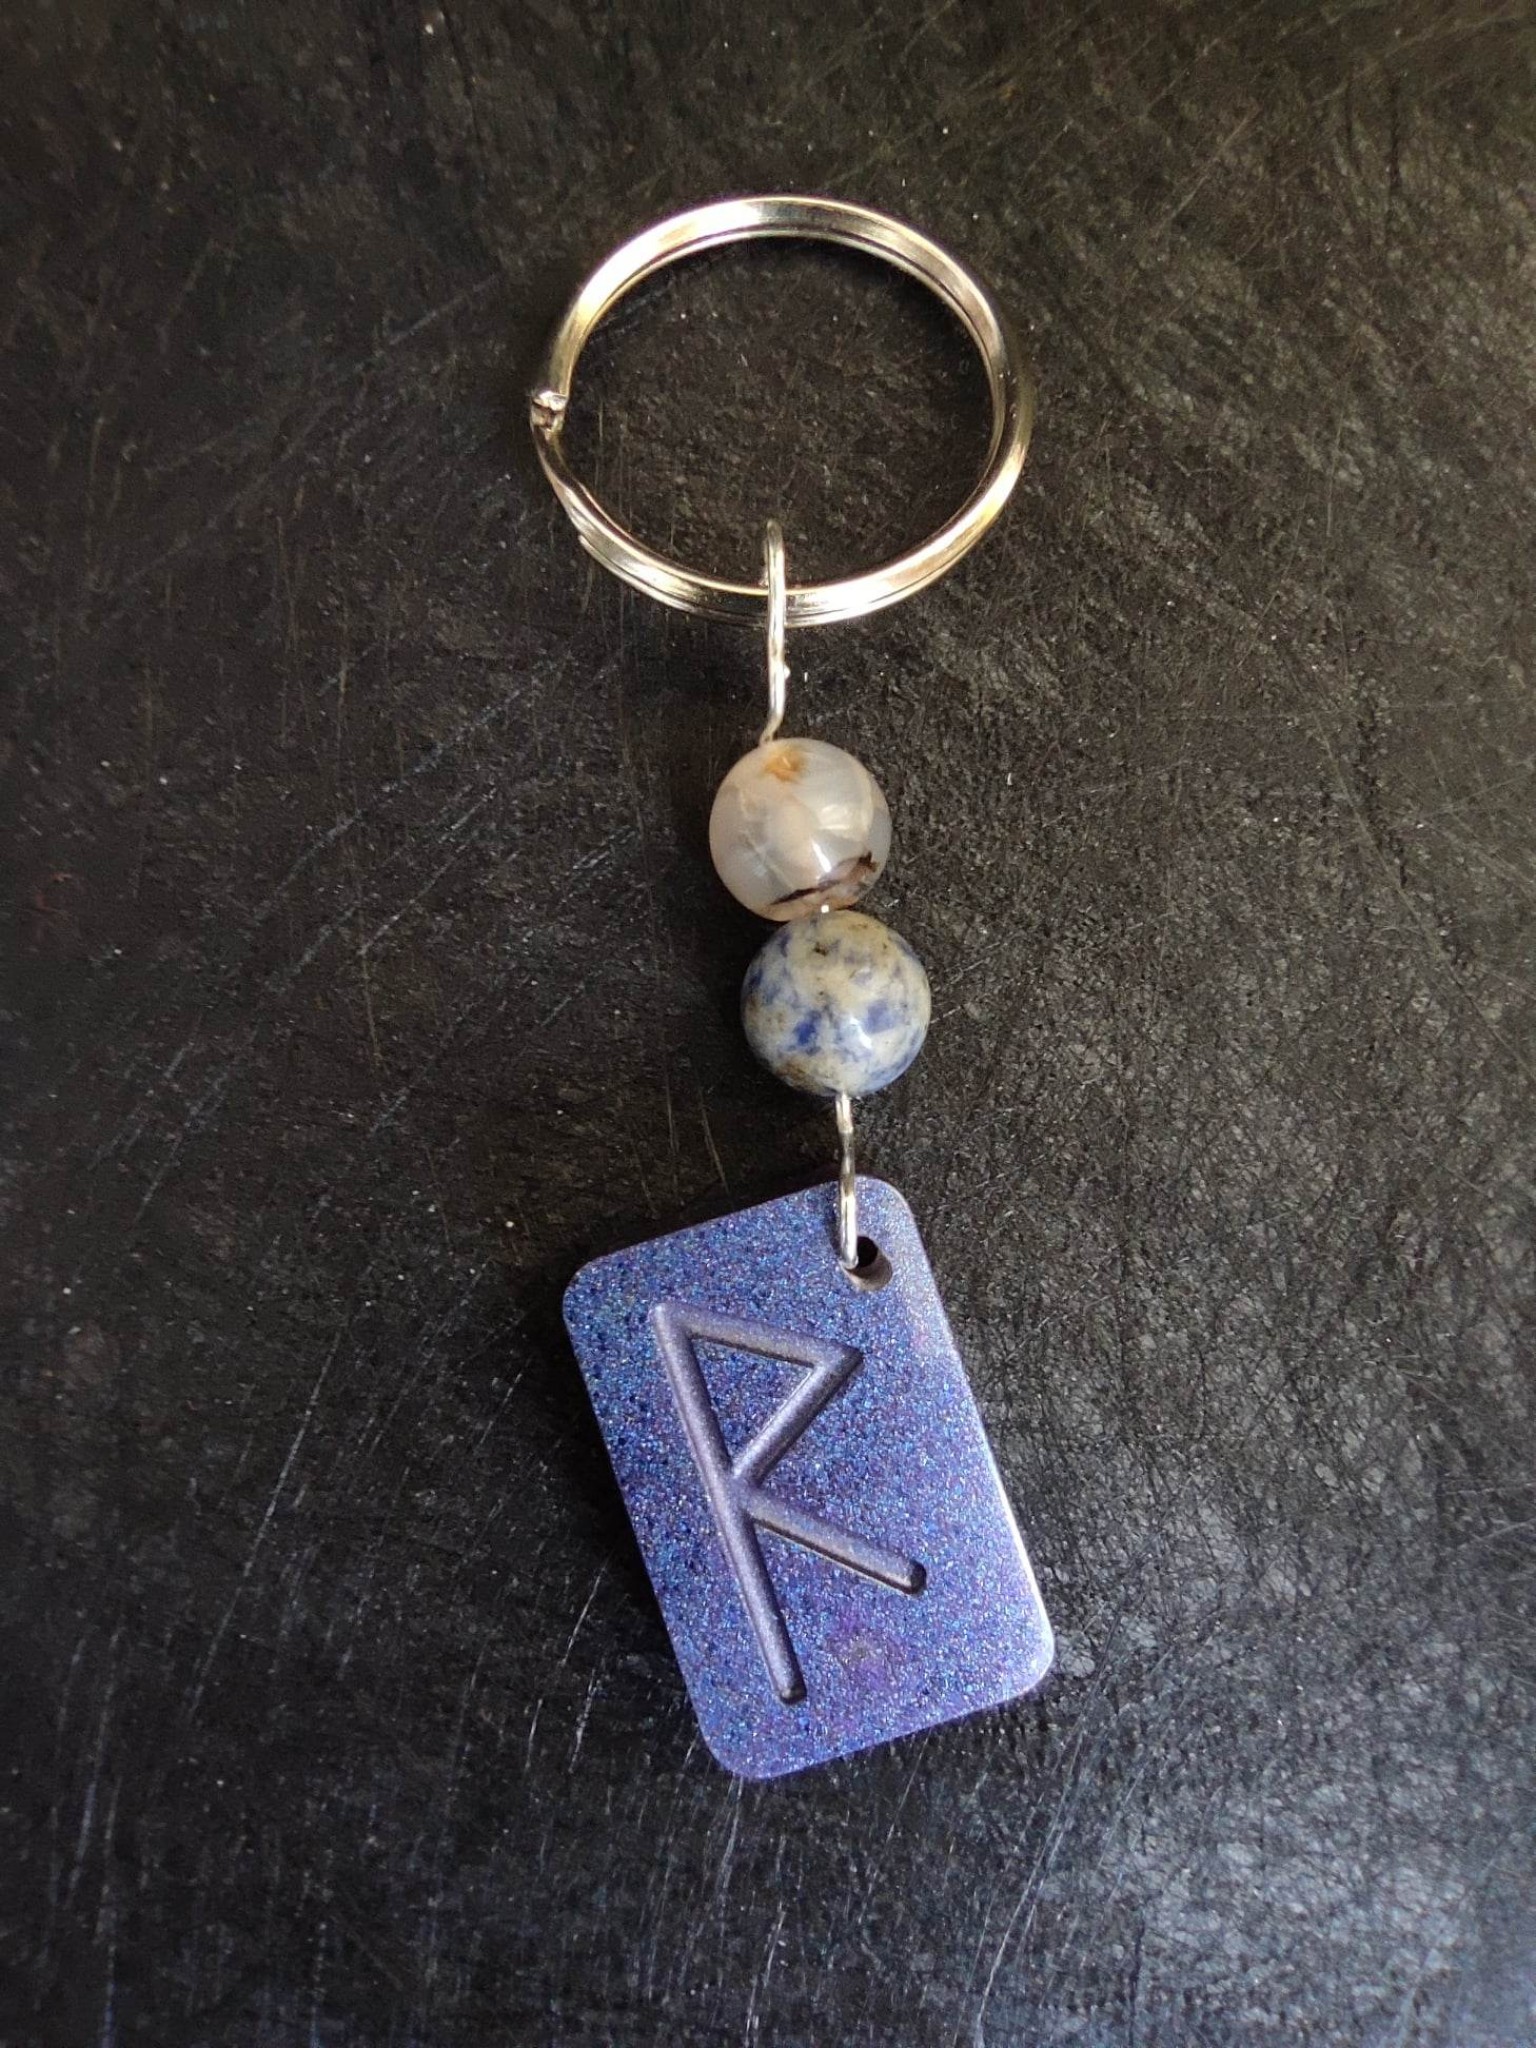 Keychain orgonite talisman with a Futhark rune for attracting money and success - Raidho